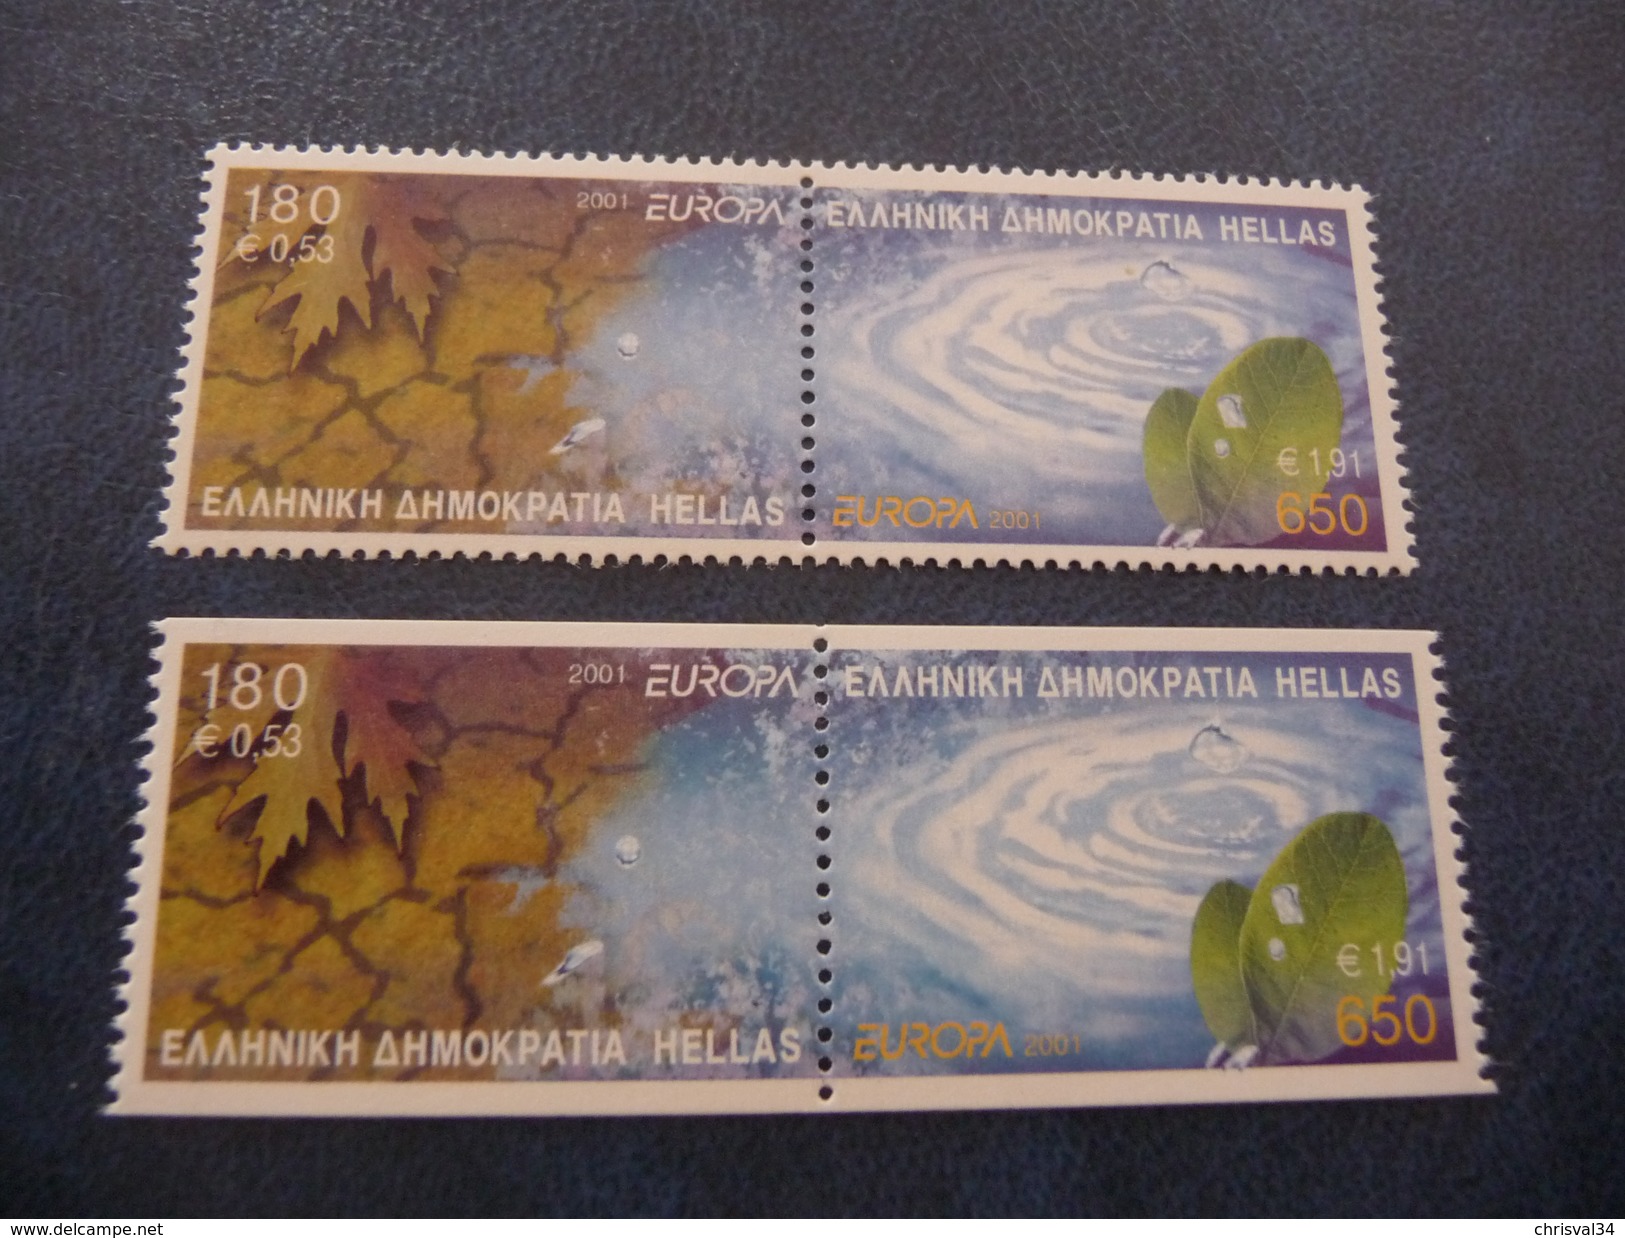 TIMBRES   EUROPA   2001   GRECE   N  2054 A 2057   COTE  17,00  EUROS      NEUFS  LUXE** - Unused Stamps